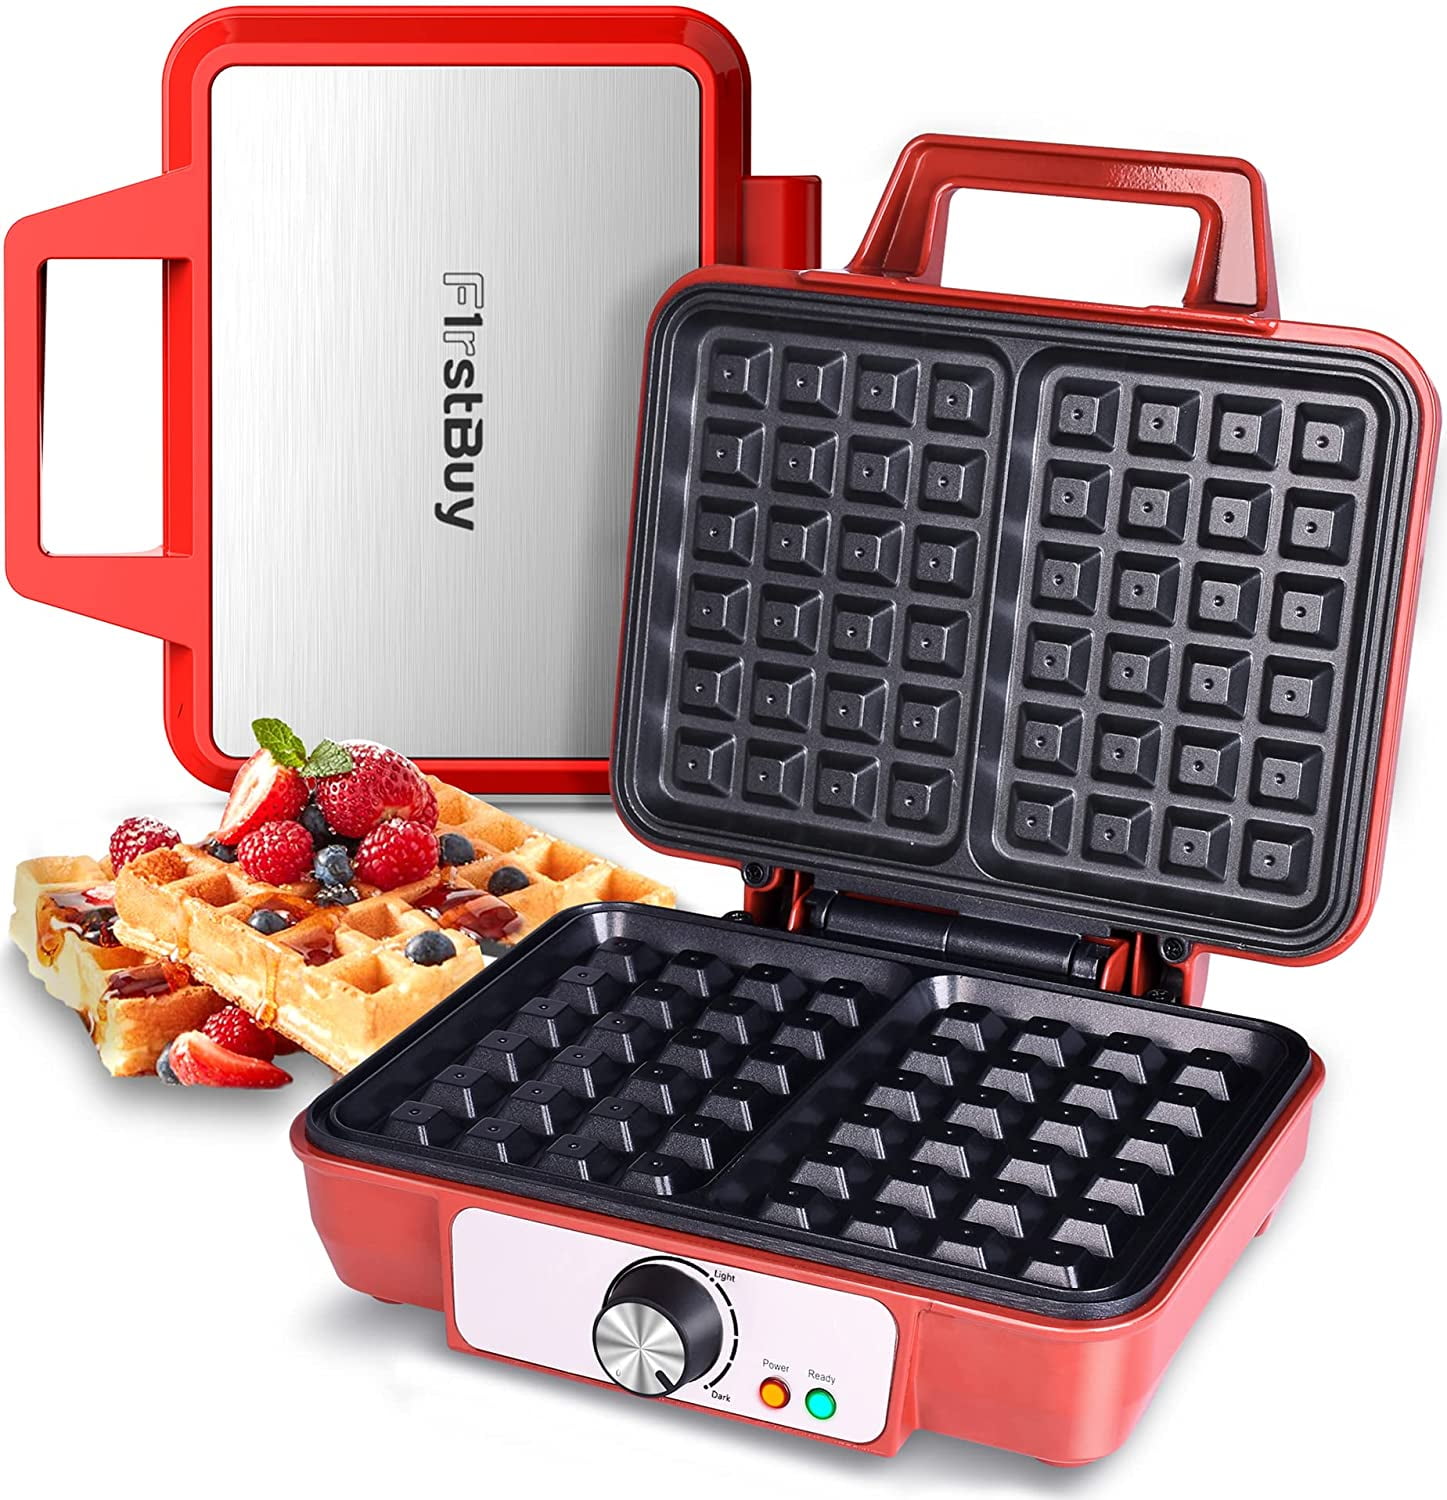 FLASH SALE! Get the Waffle Stick Maker for only $22.99 (reg. price $34.99)!  To get this deal you must: 1. Shop at www.beyondthera…